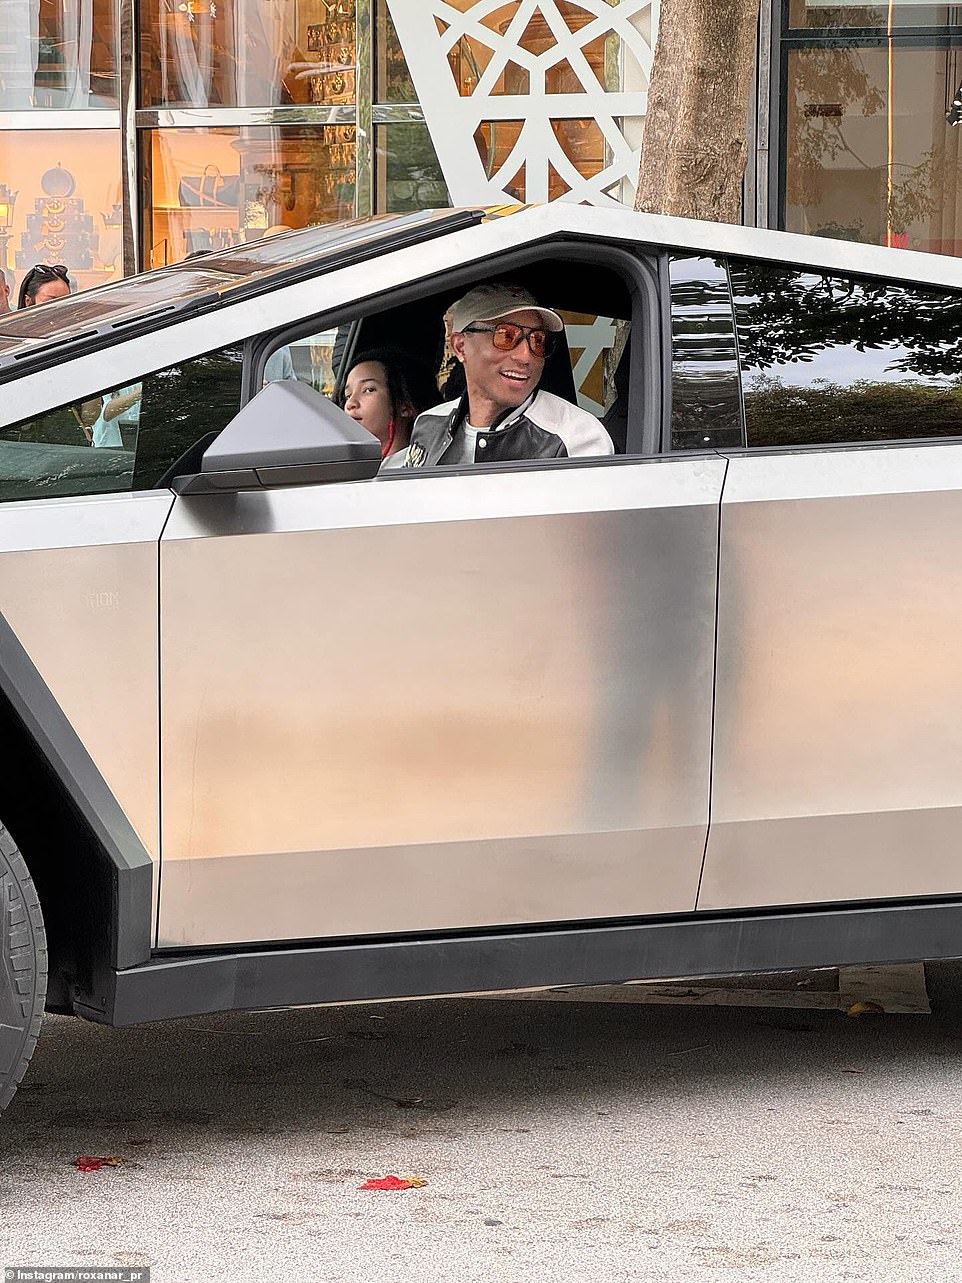 'Pharrellel parking' - Pharrell Williams gave up and parked on the street after trying unsuccessfully to parallel park in front of a Louis Vuitton store in Miami, Florida.